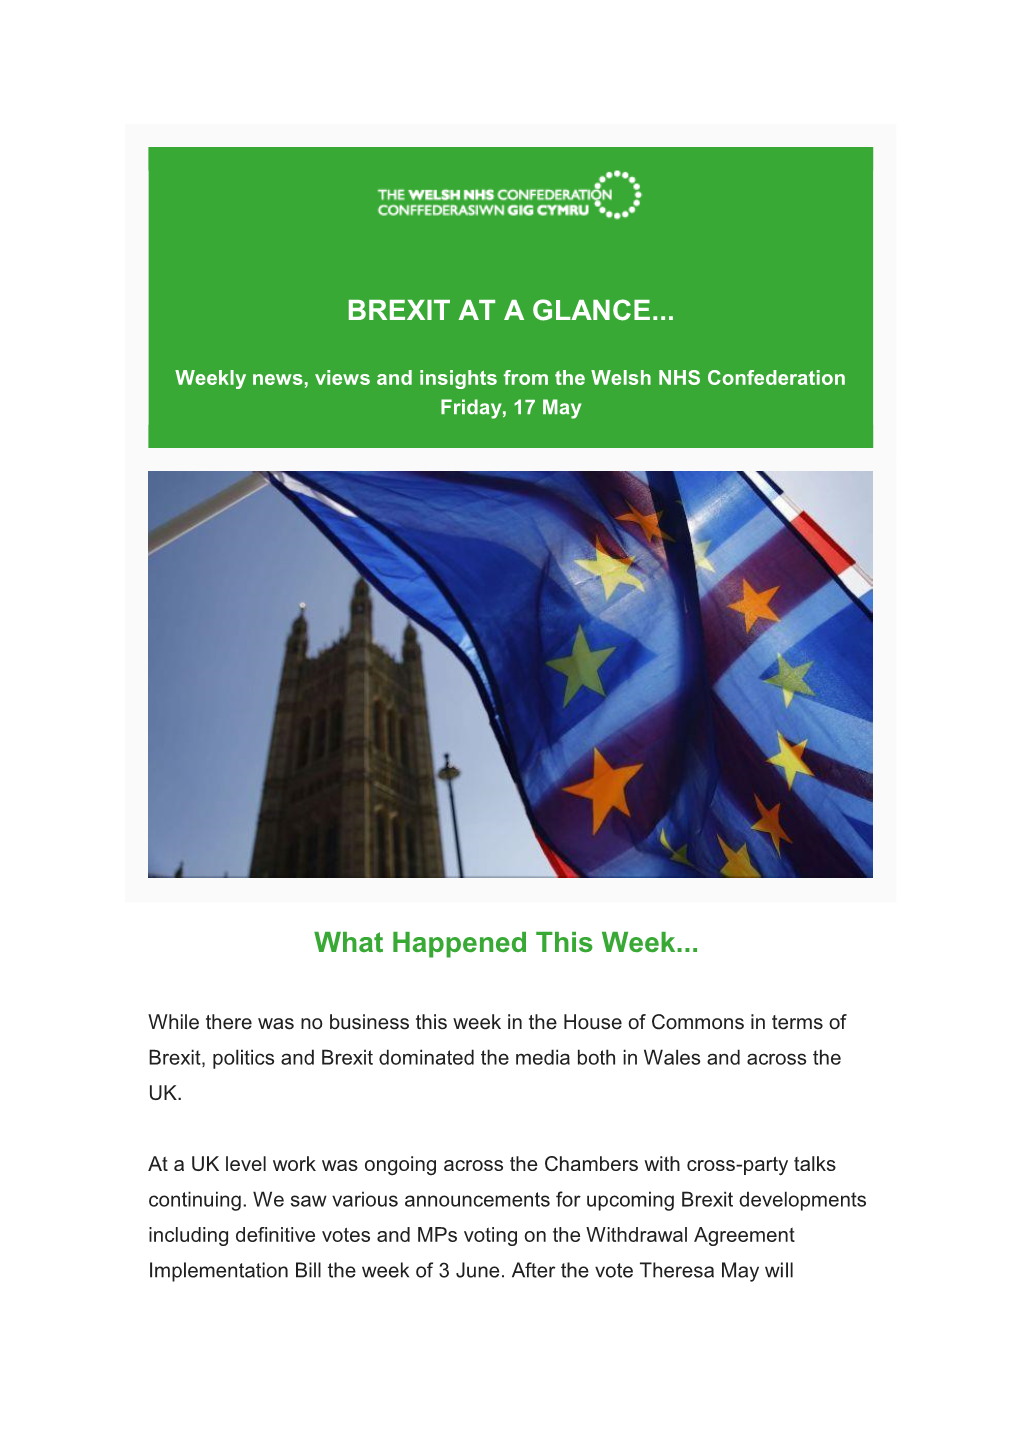 BREXIT at a GLANCE... What Happened This Week